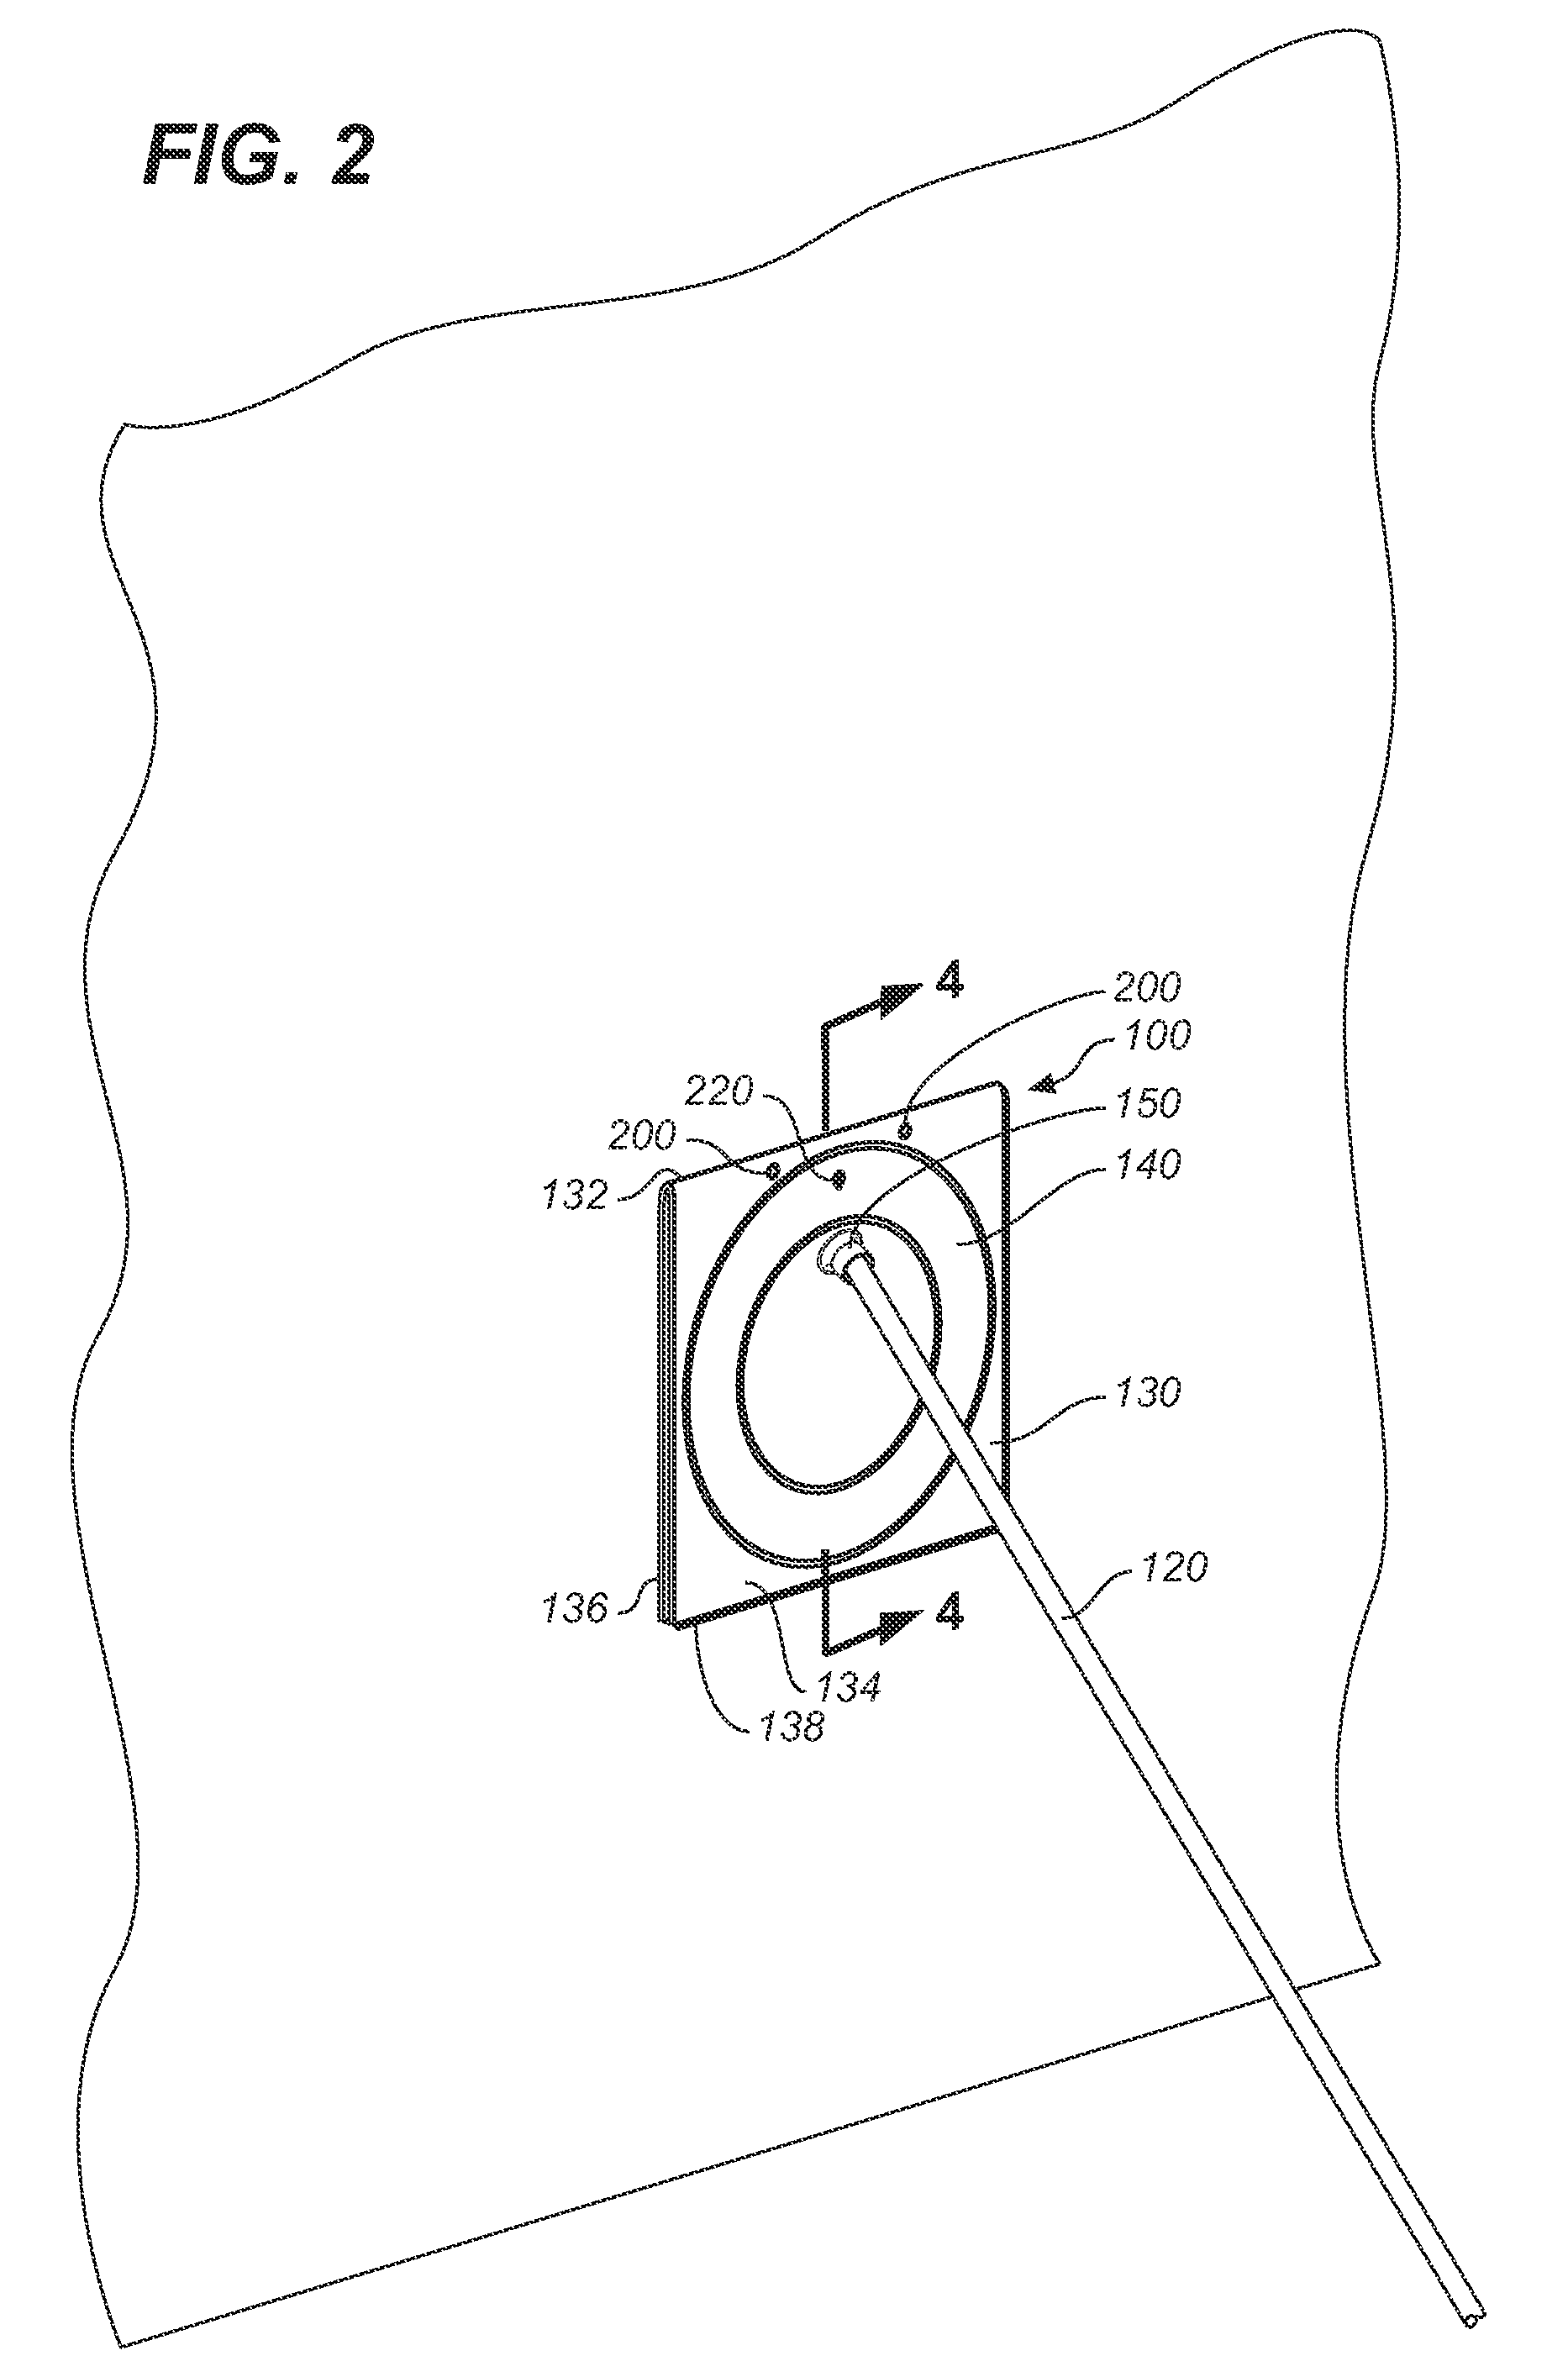 Breaching apparatus for use with explosive charges